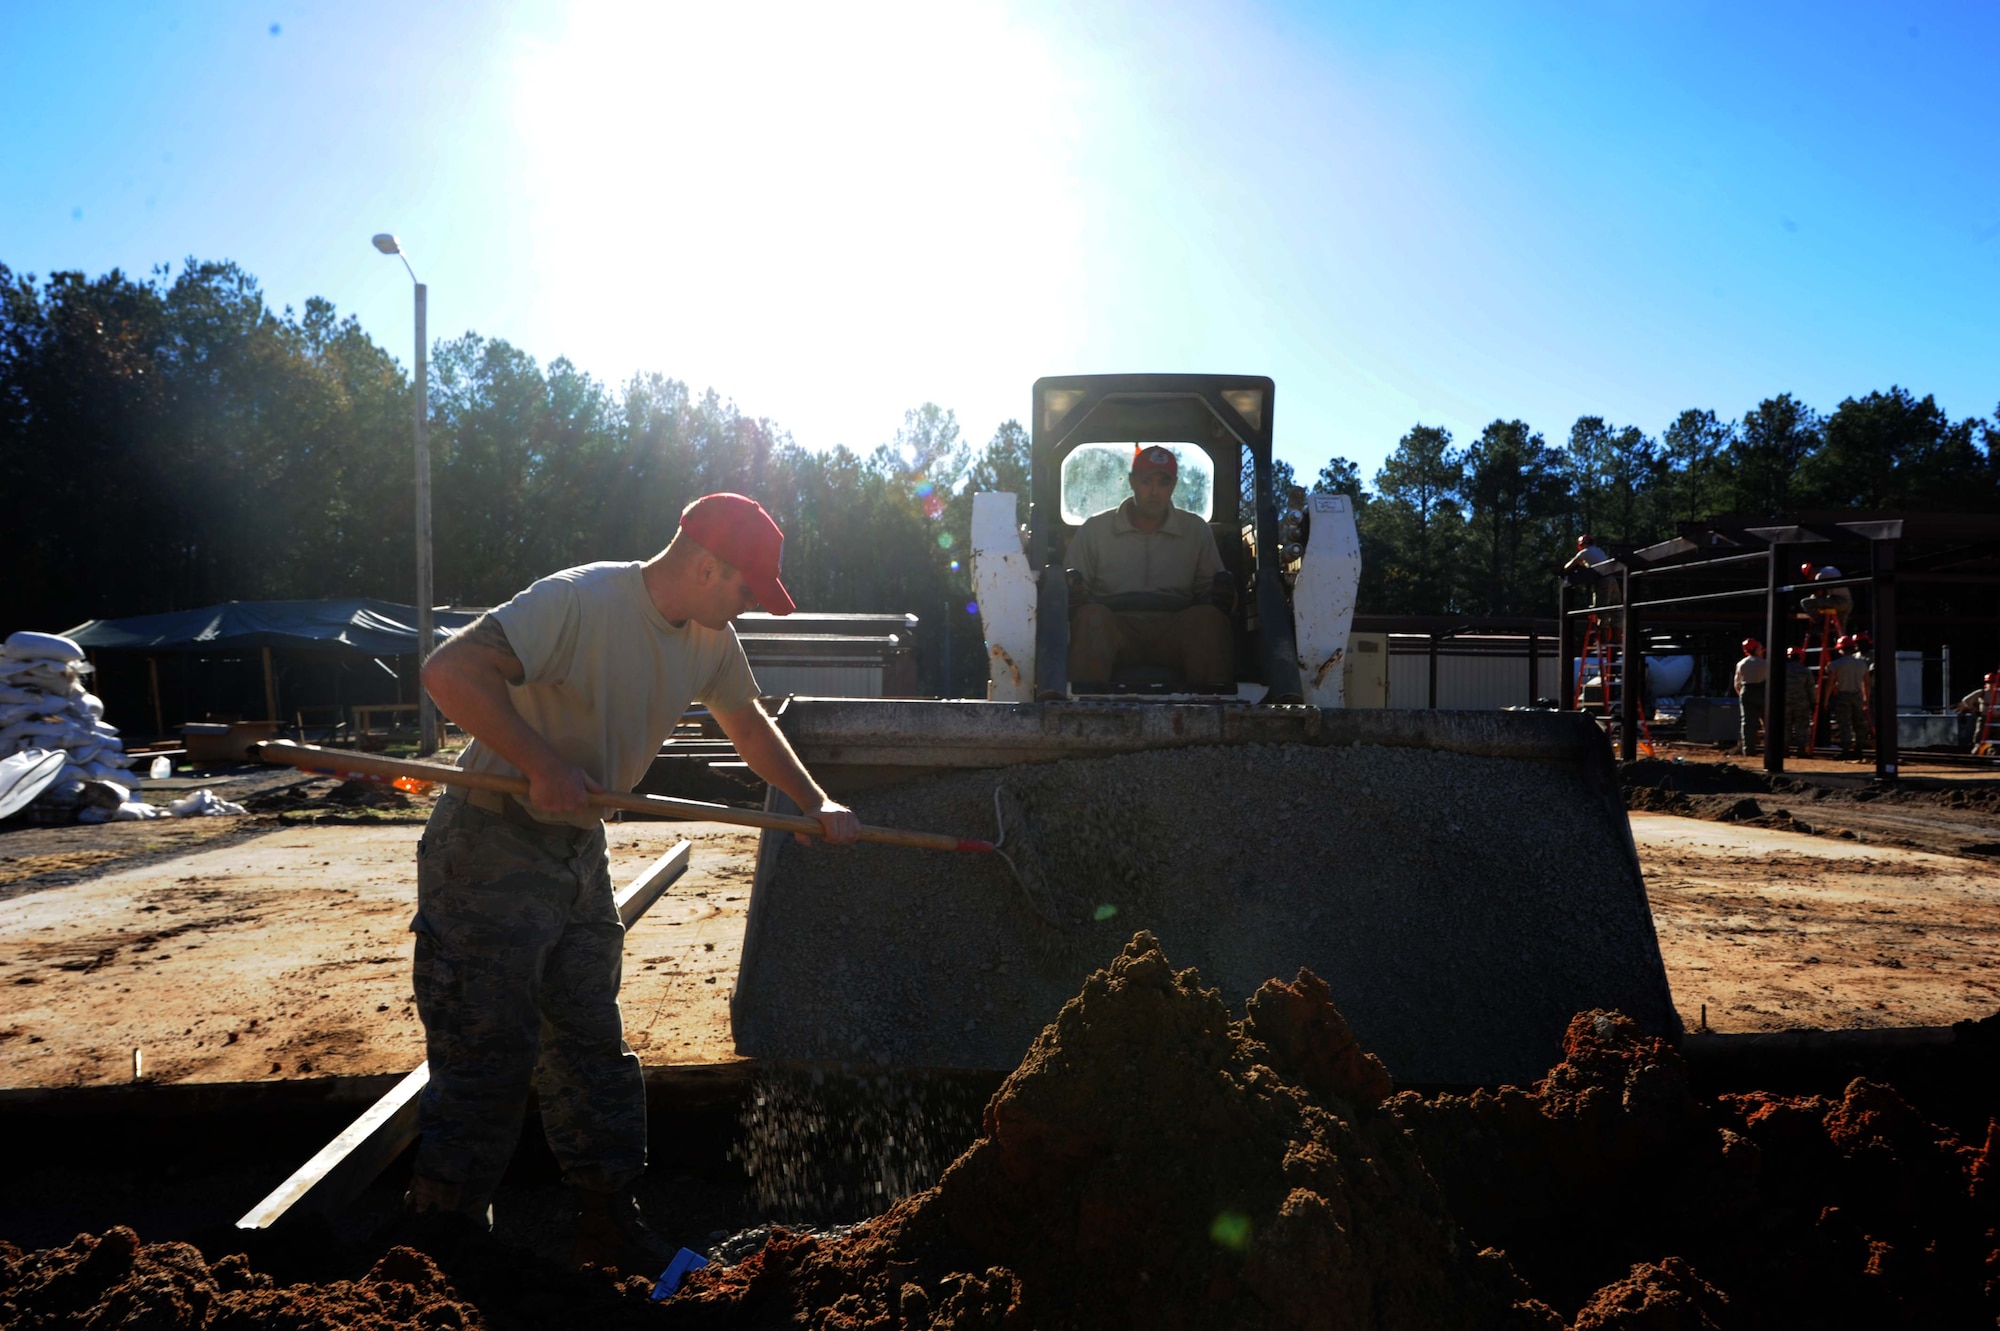 Airmen from the 823rd Rapid Engineer Deployable Heavy Operational Repair Squadron Engineer (RED HORSE) from Hurlburt Field, Florida, prepare a foundation footer for concrete at the Vigilant Warrior training site Dec. 15, 2015, near Titus, Alabama. RED HORSE is in the process of constructing a new latrine facility, K-Span buildings or arched steel panel buildings and lodging facilities. (U.S. Air Force photo by Airman 1st Class Alexa Culbert)